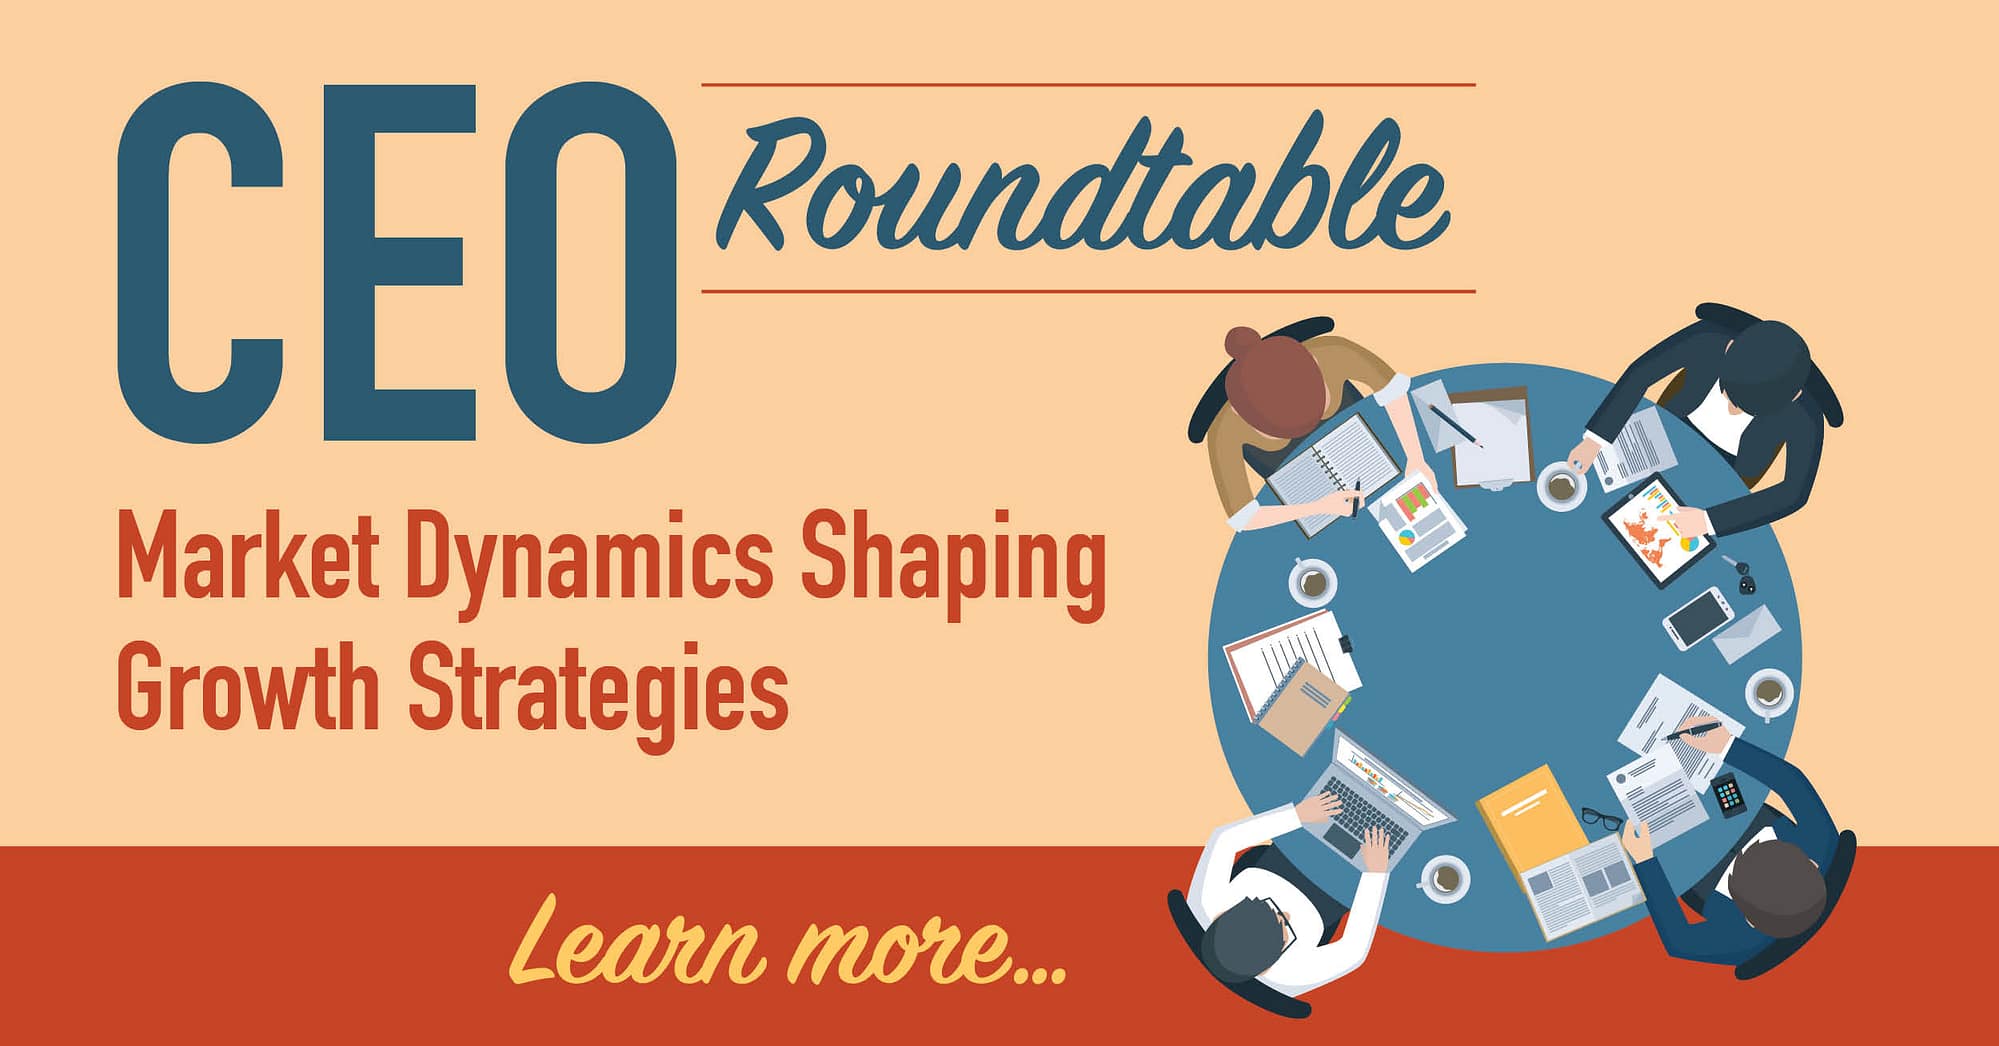 CEO Roundtable: Market Dynamics Shaping Growth Strategies